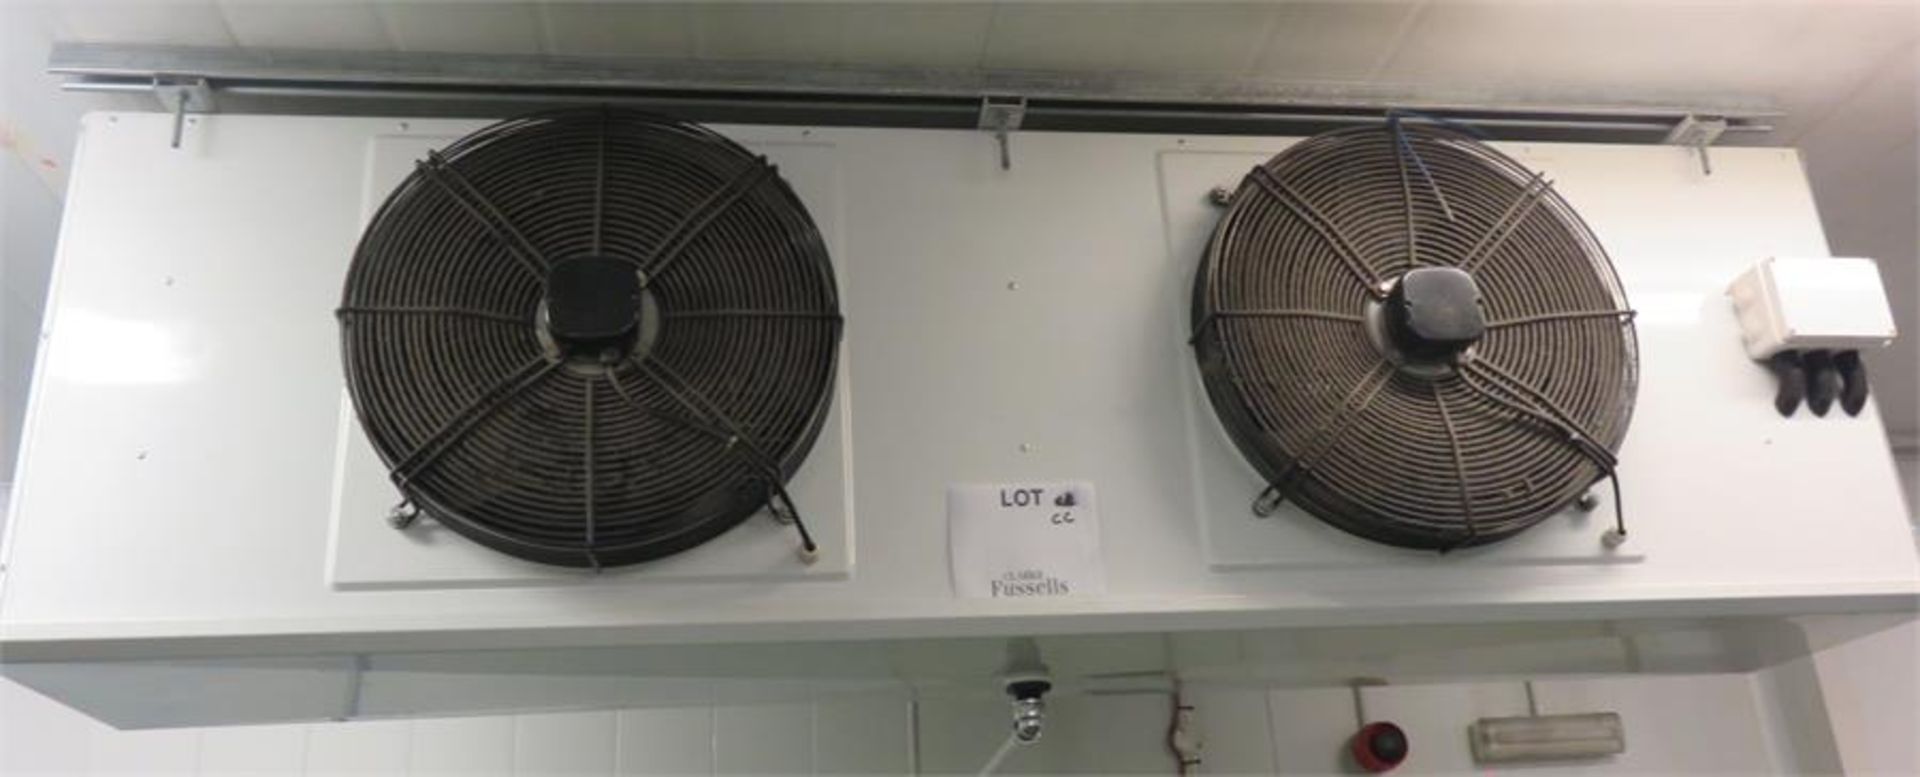 FAN EVAPORATORS AND CONDENSERS - Image 6 of 6